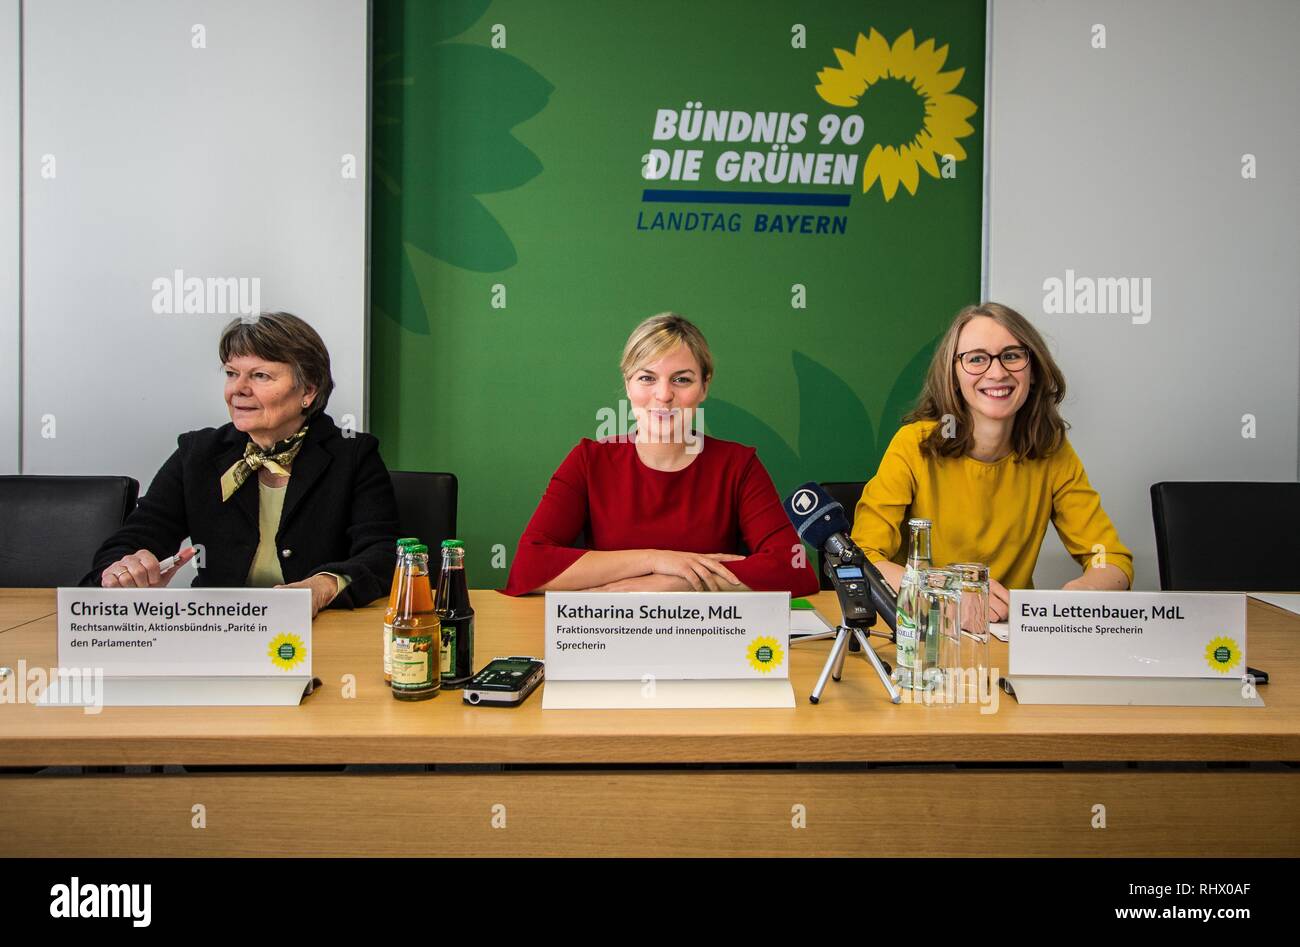 Munich, Bavaria, Germany. 4th Feb, 2019. Katharina Schulze, Eva Lettenbauer und women's rights advocate Christa Weigl-Schneider assembled a press conference in the Bavarian Landtag to discuss the ''žHalf of the Power Law' (Haelfte der Macht Gesetz) for Bayern, which would establish women as half of the power structure of Bavaria if passed. The trio also discussed mechanisms for increasing female participation in politics and in legislative roles. Credit: Sachelle Babbar/ZUMA Wire/Alamy Live News Stock Photo